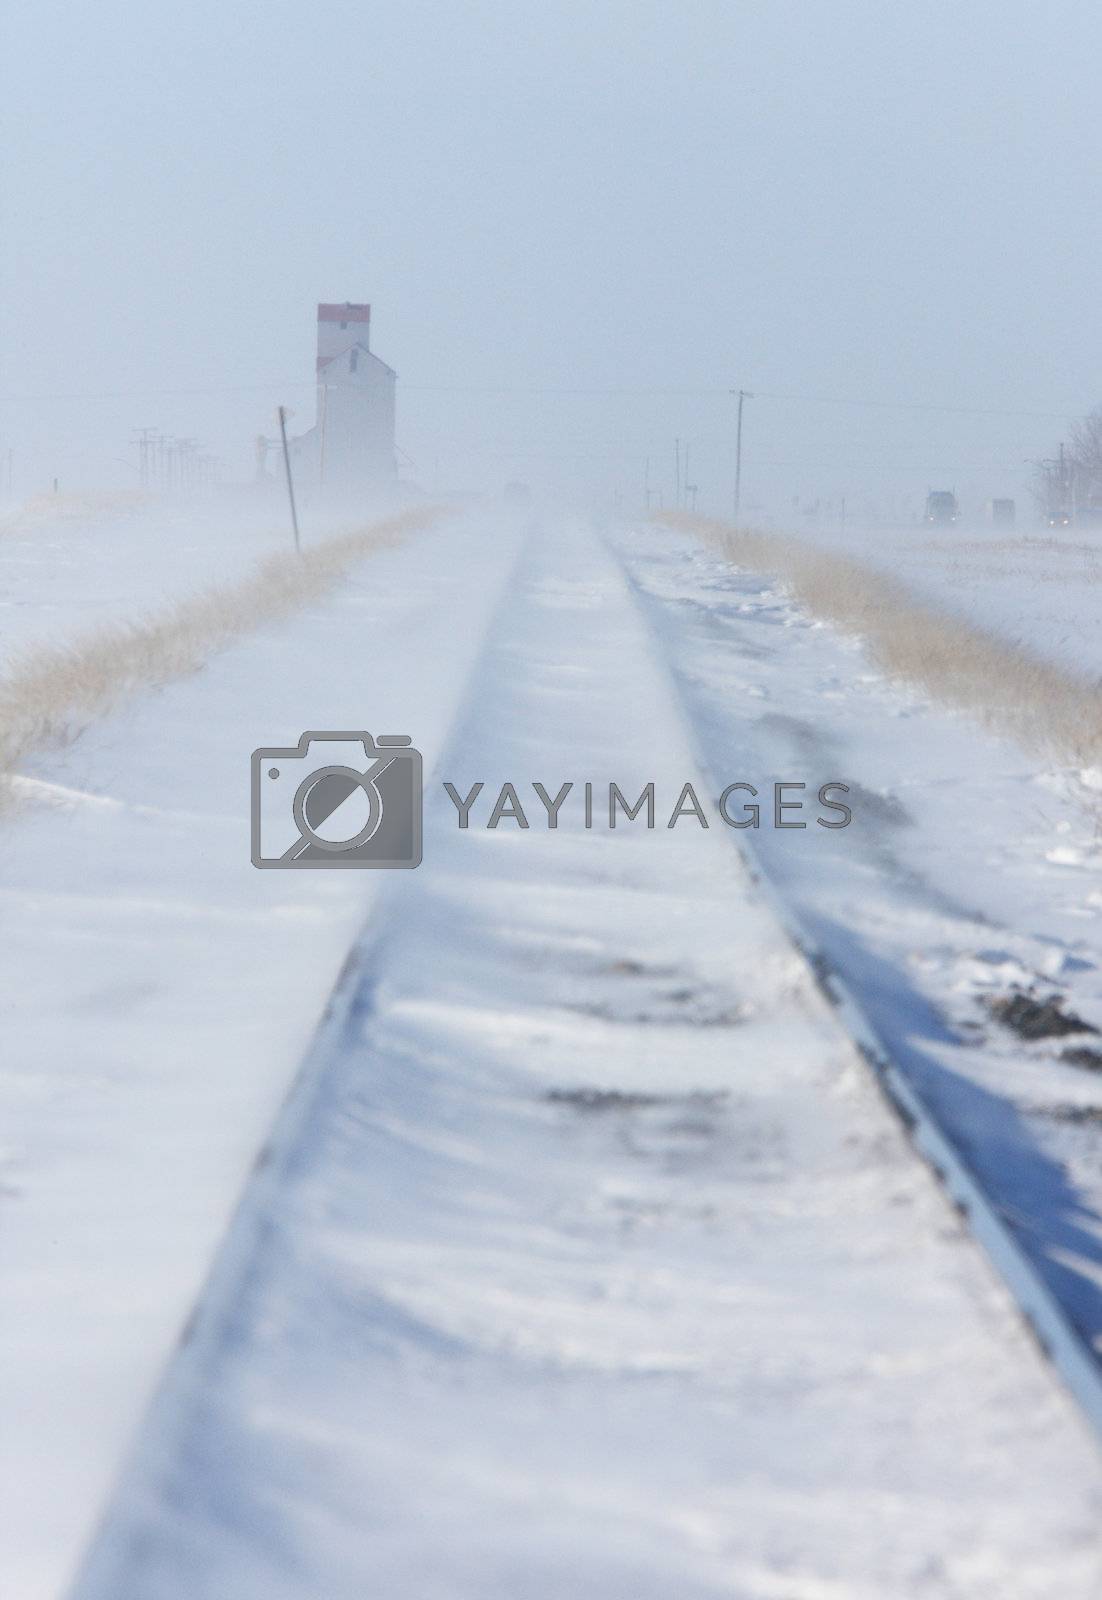 Royalty free image of Train Tracks and Grain Elevator in Blizzard Saskatchewan  by pictureguy